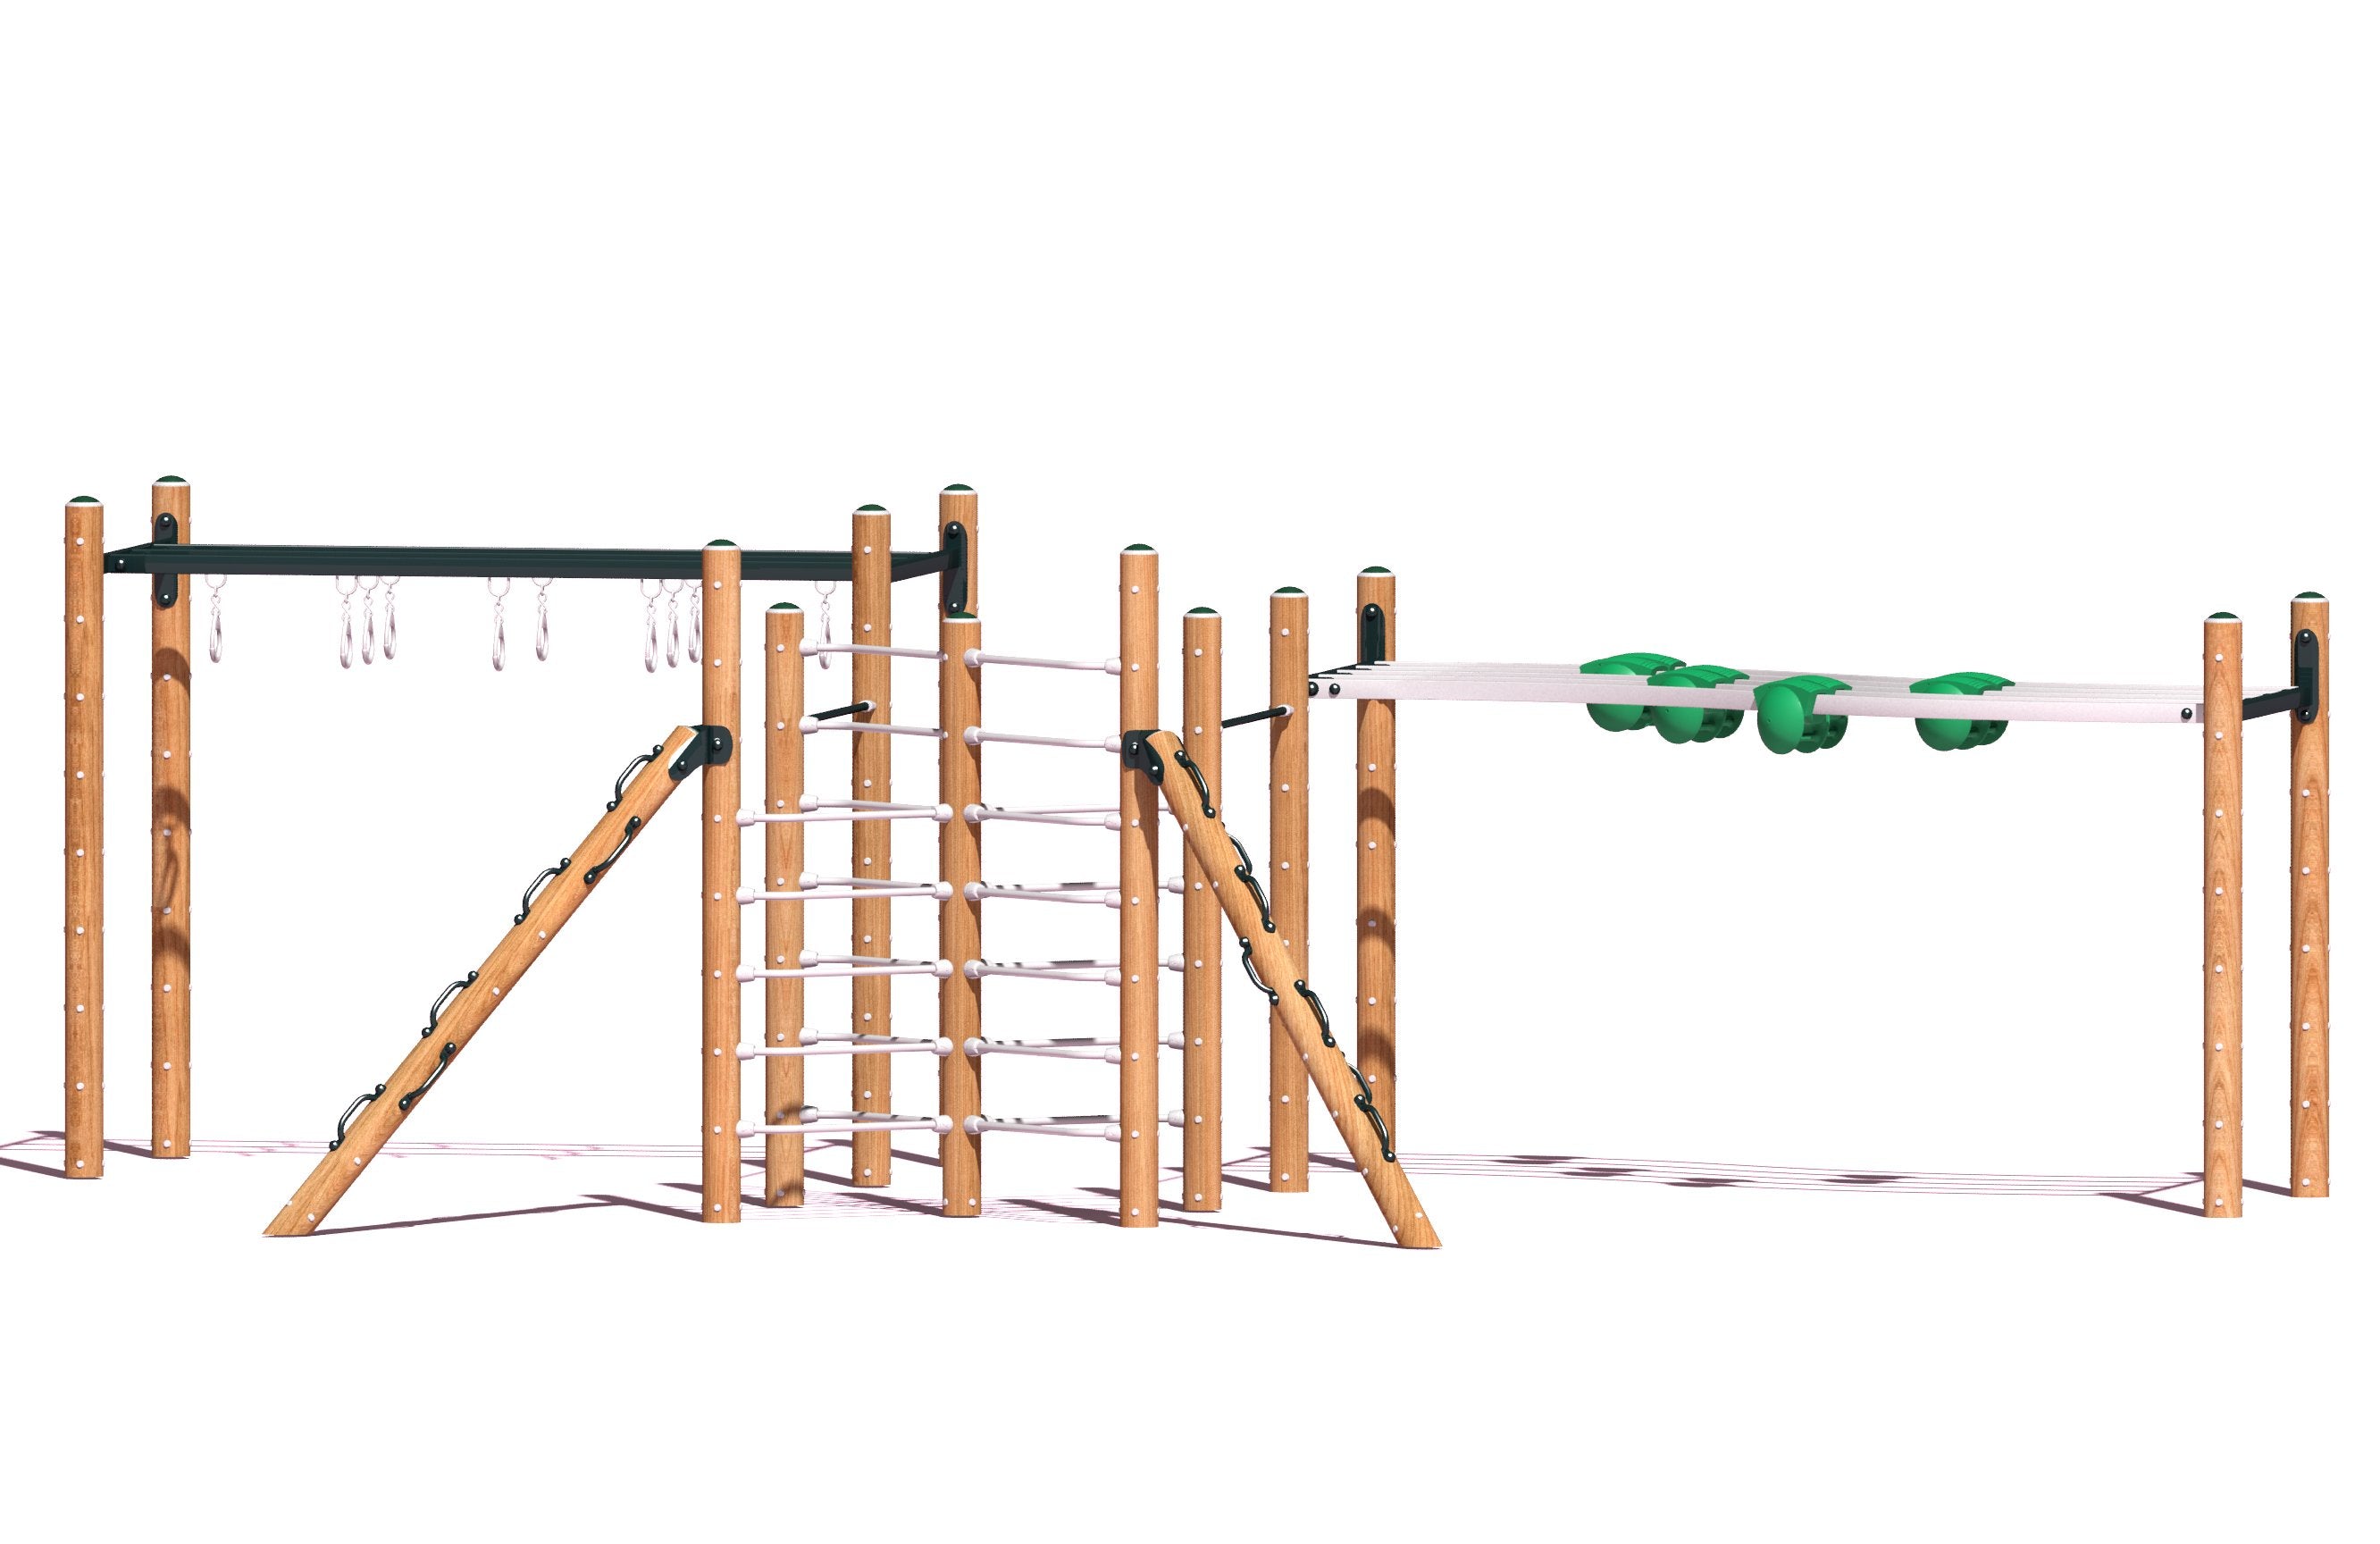 Criss Cross Play System  | WillyGoat Playground & Park Equipment